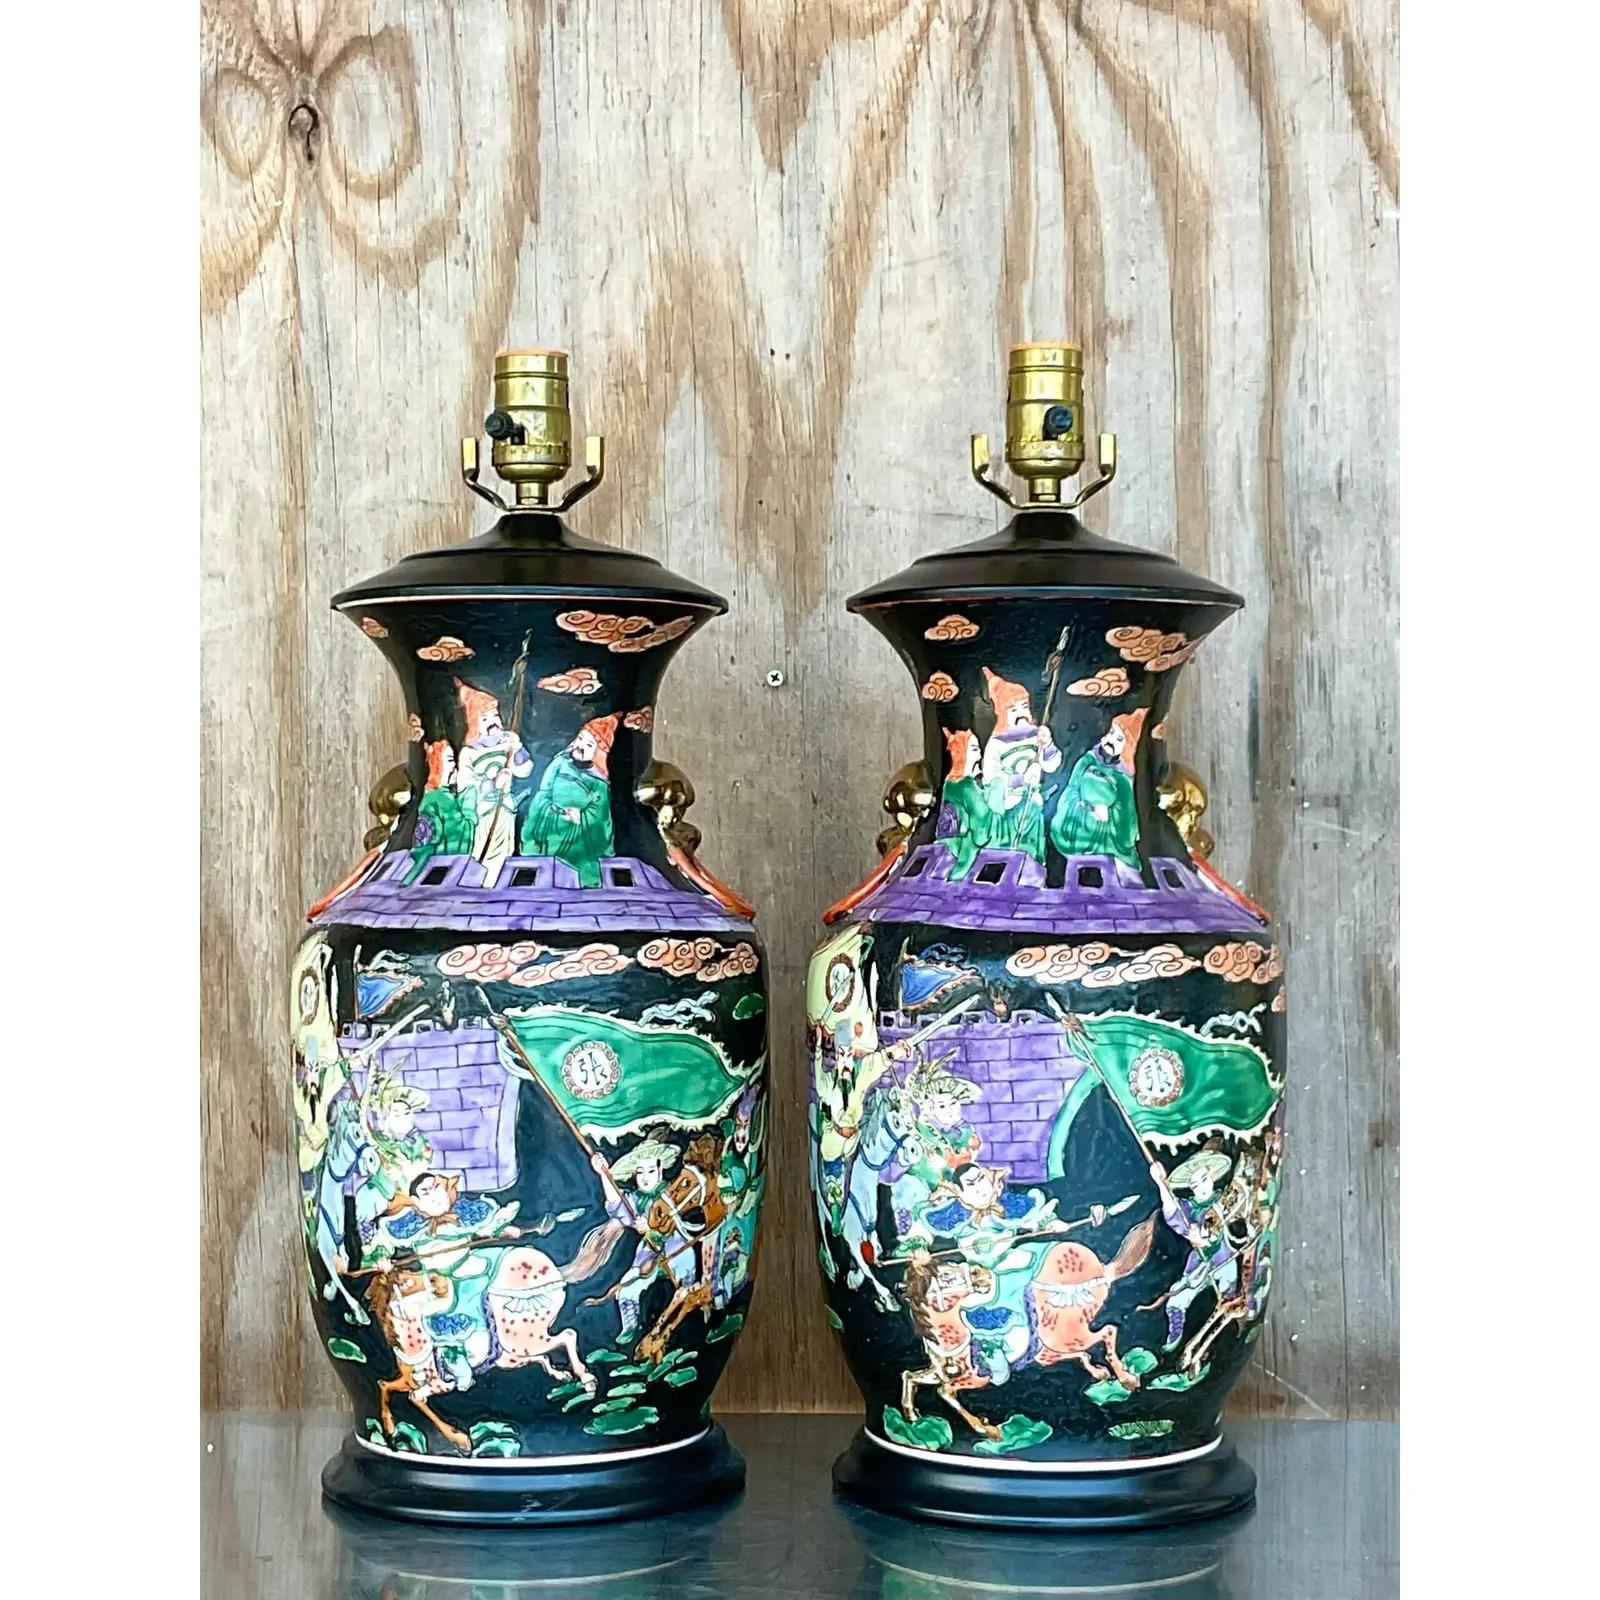 North American Vintage Asian Jewel Tone Chinoiserie Ceramic Lamps - a Pair For Sale